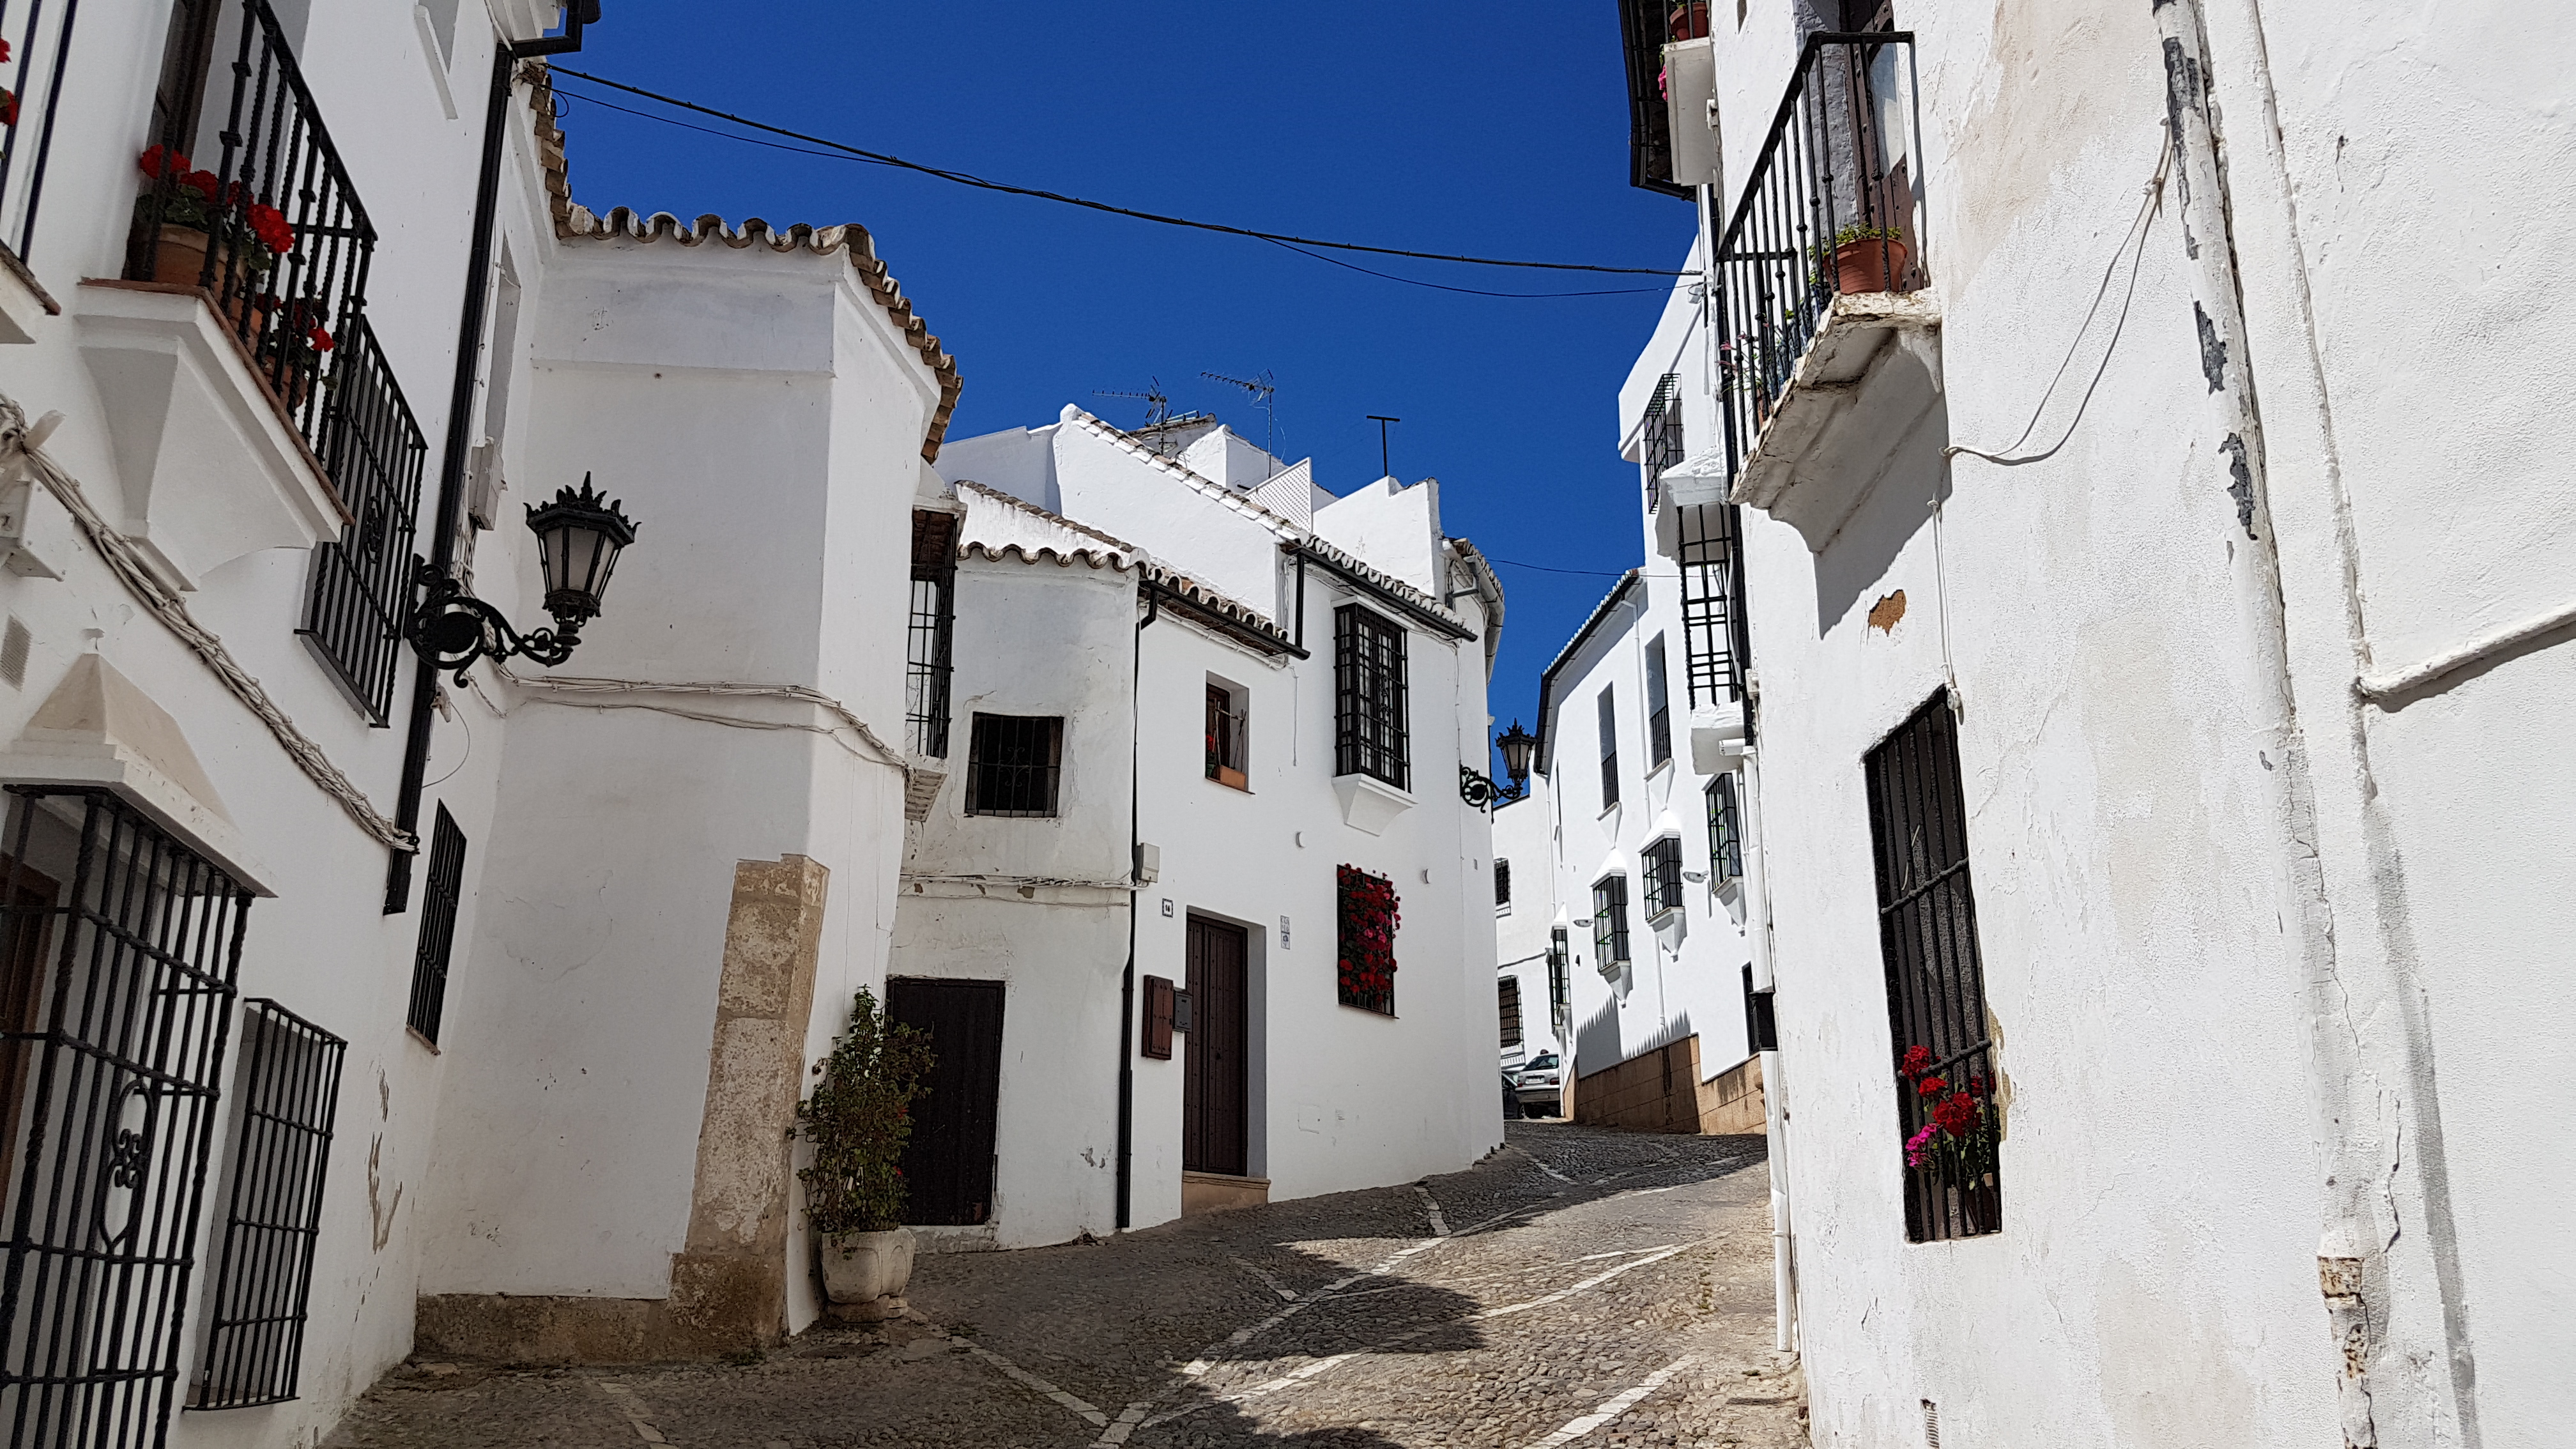 The white buildings of Ronda